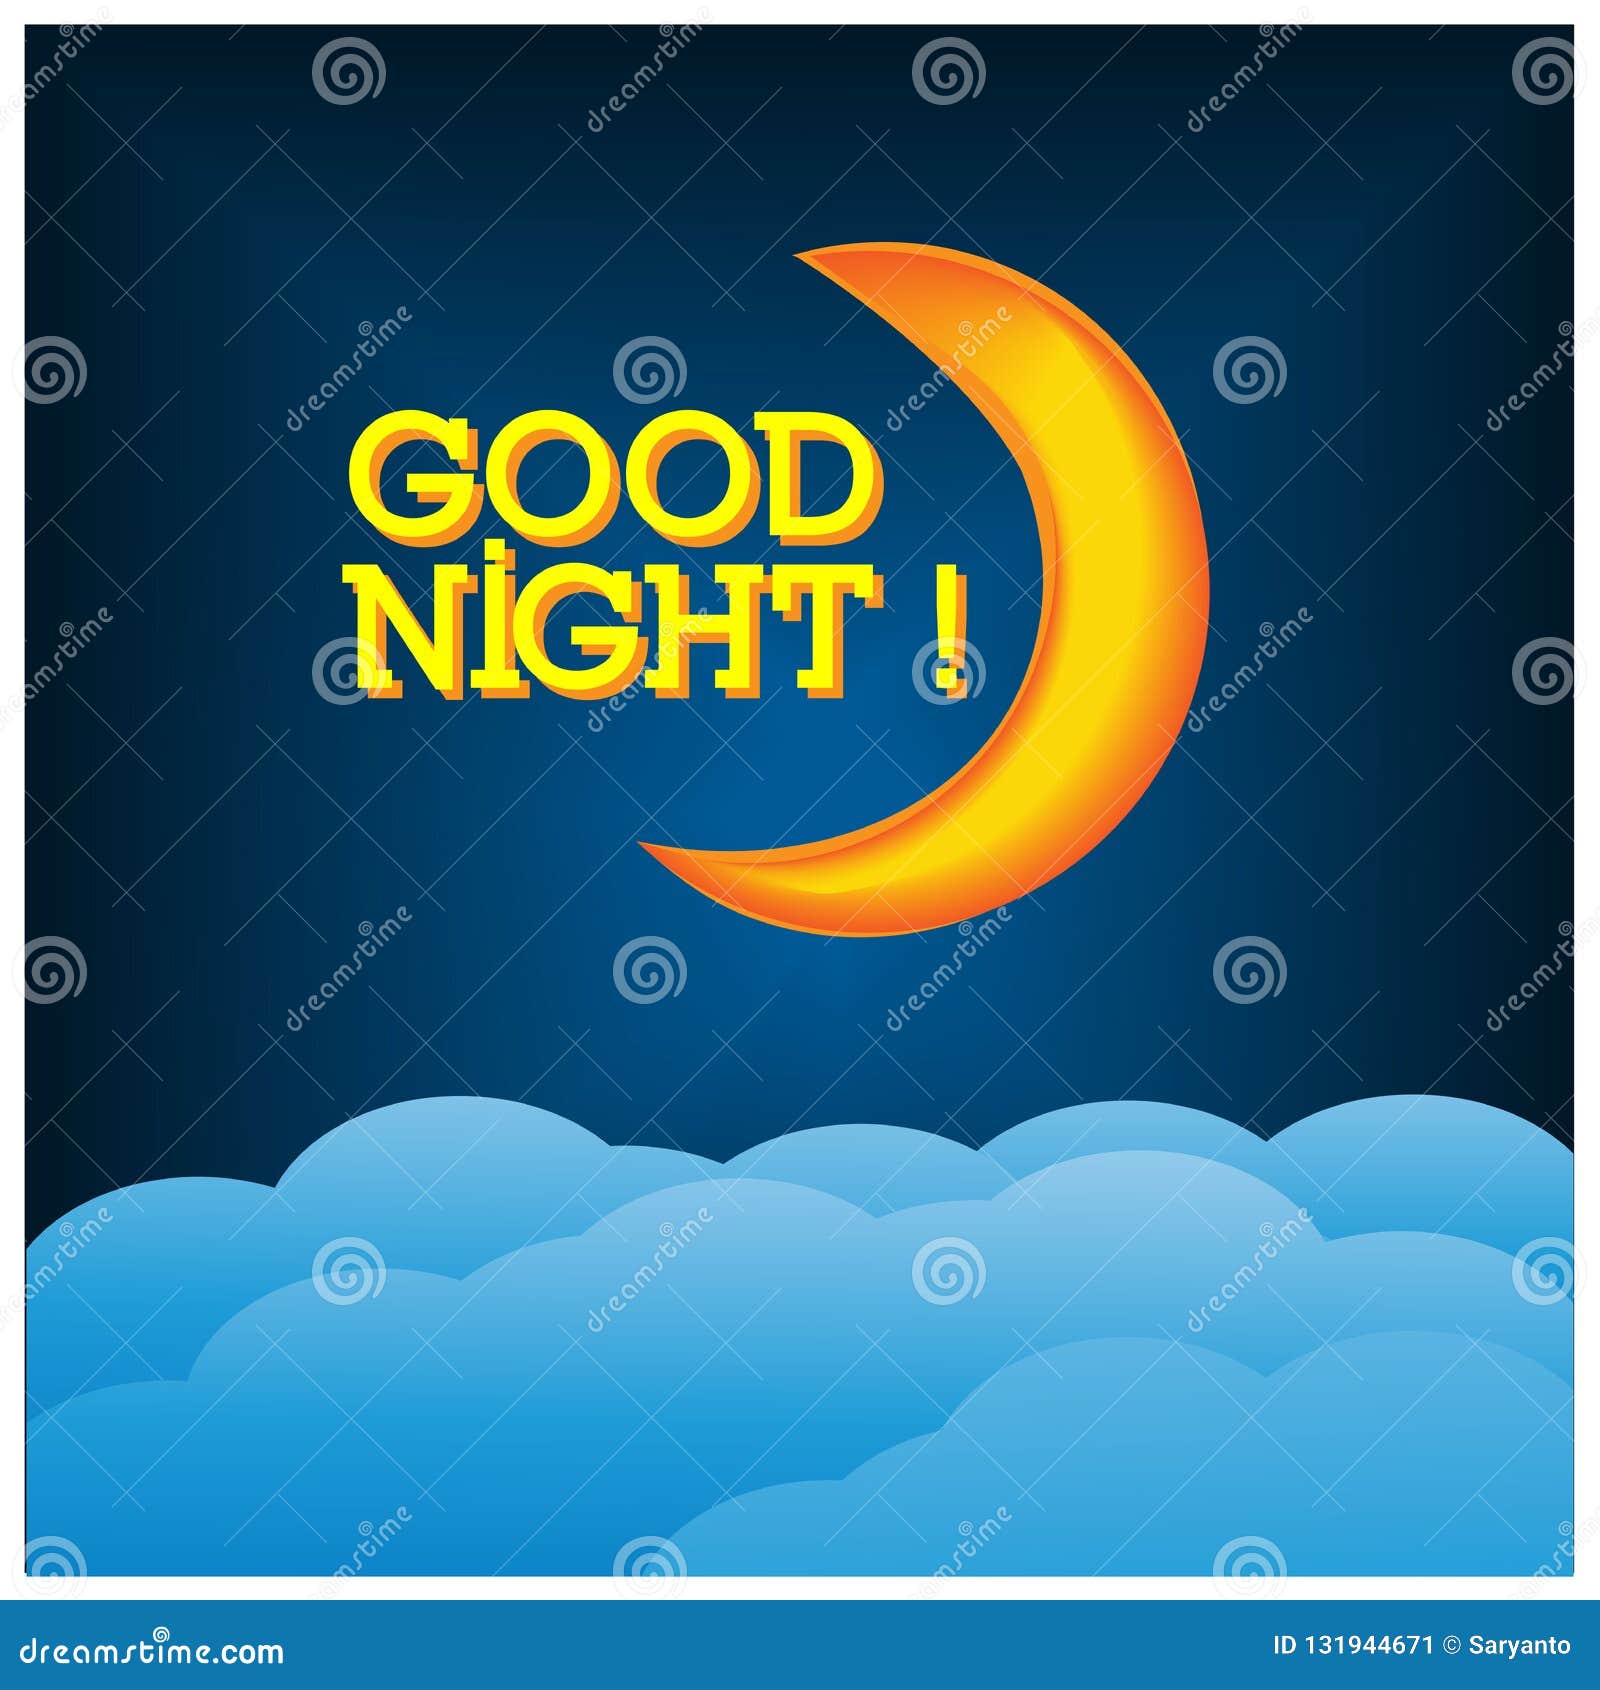 Good Night with Crescent Moon Illustration Vector Design Stock Vector ...